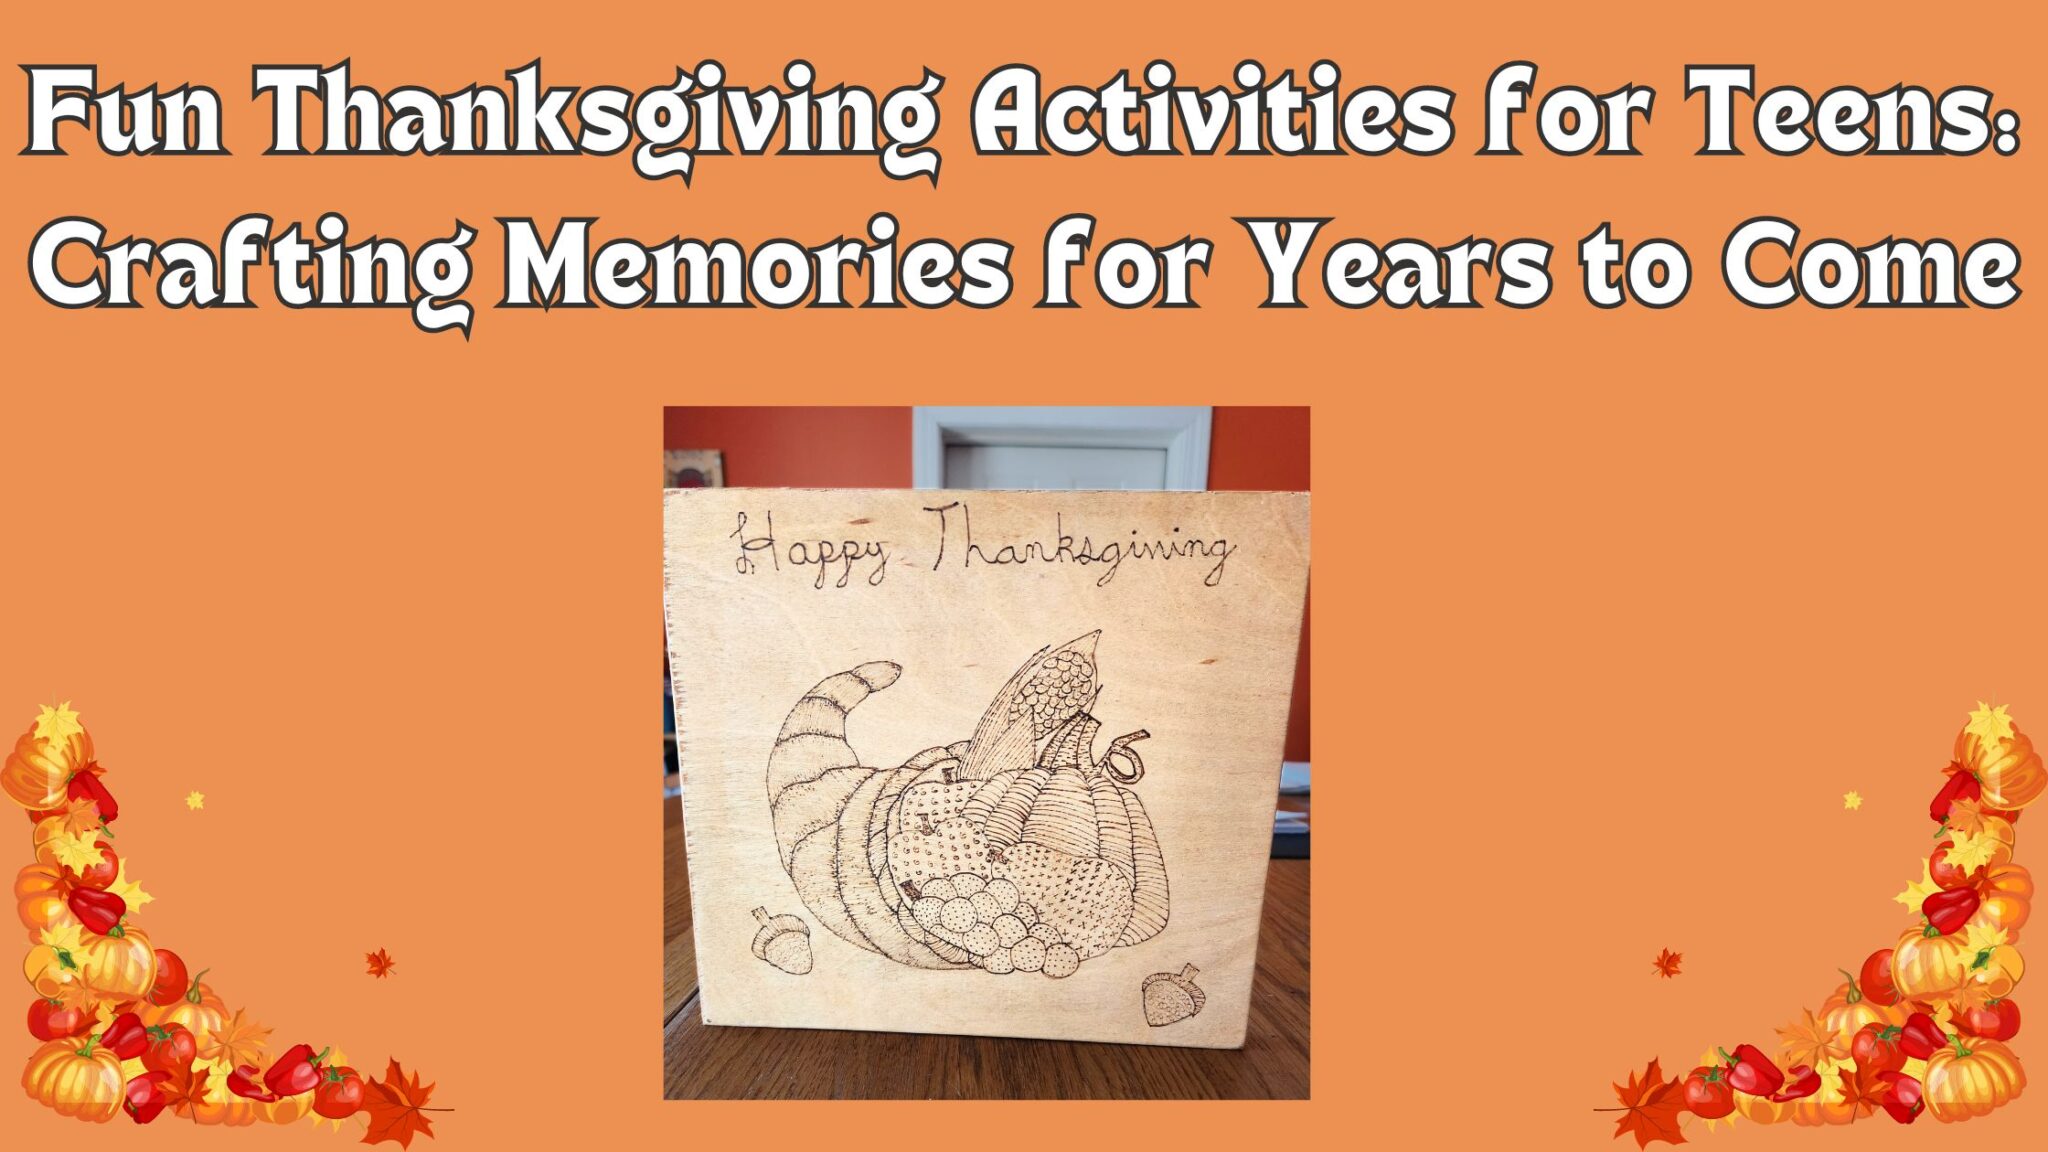 You are currently viewing Fun Thanksgiving Activities for Teens: Crafting Memories for Years to Come